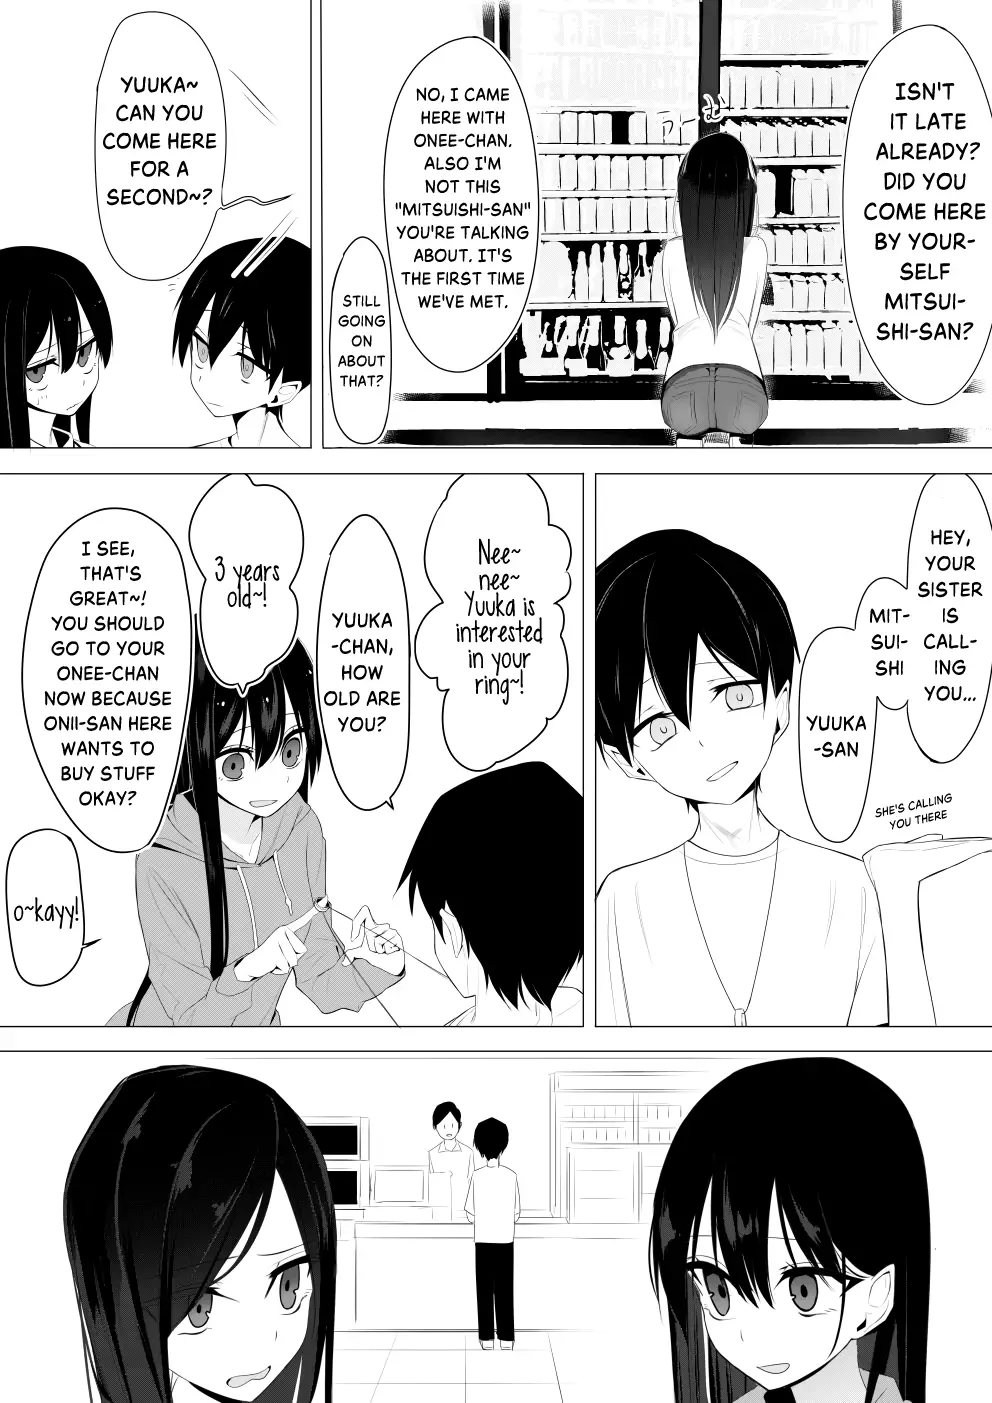 Mitsuishi-San Is Being Weird This Year - 6 page 3-92d4f45e